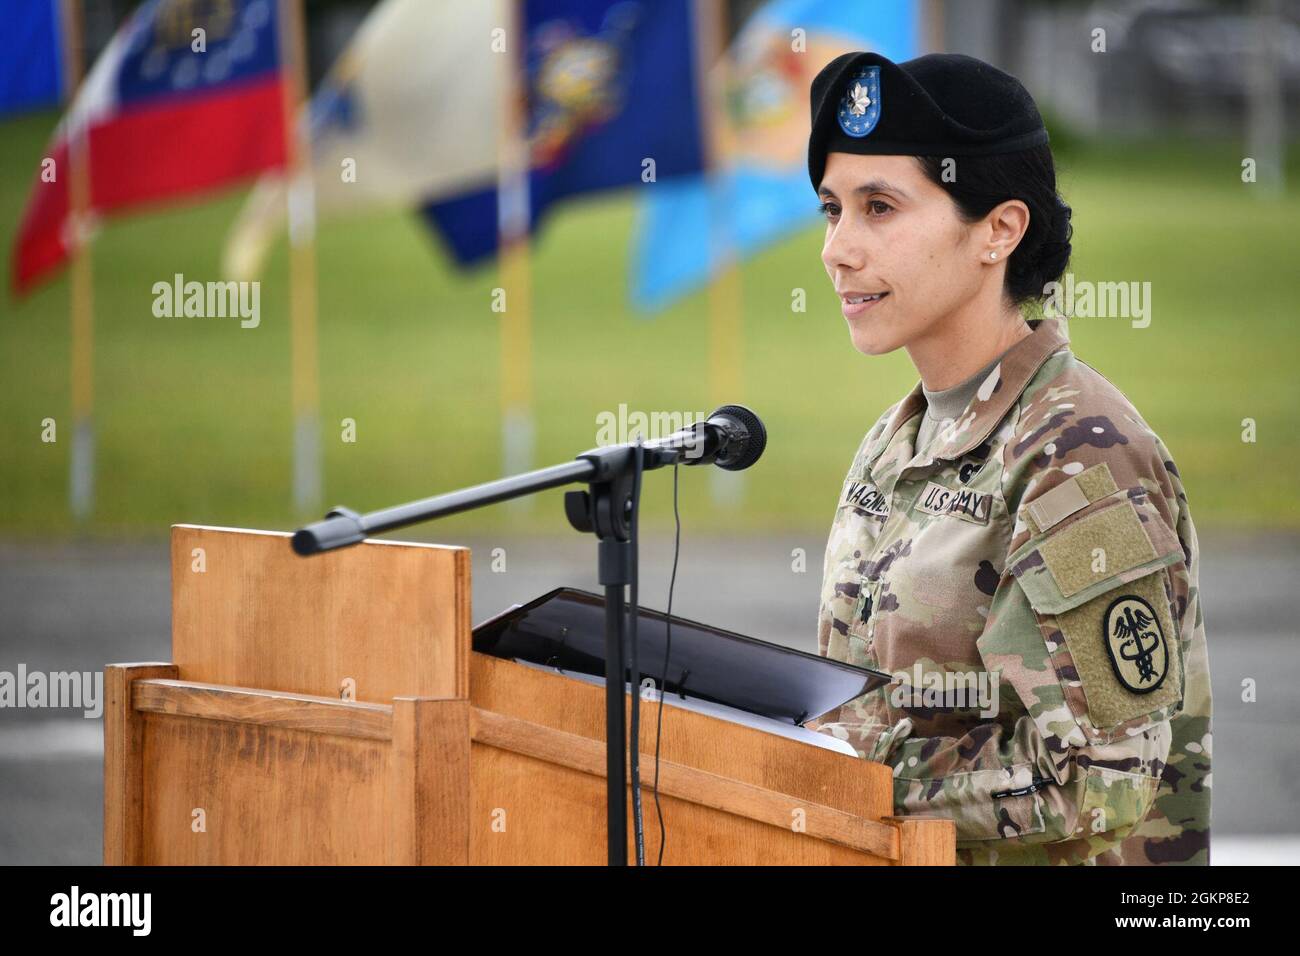 The U.S. Army Health Clinic Grafenwoehr incoming commander U.S. Army Lt. Col. Crista Wagner addresses the audience in attendance during the USAHC Grafenwoehr Change of Command Ceremony at Tower Barracks, Grafenwoehr, Germany, June 11, 2021. Stock Photo